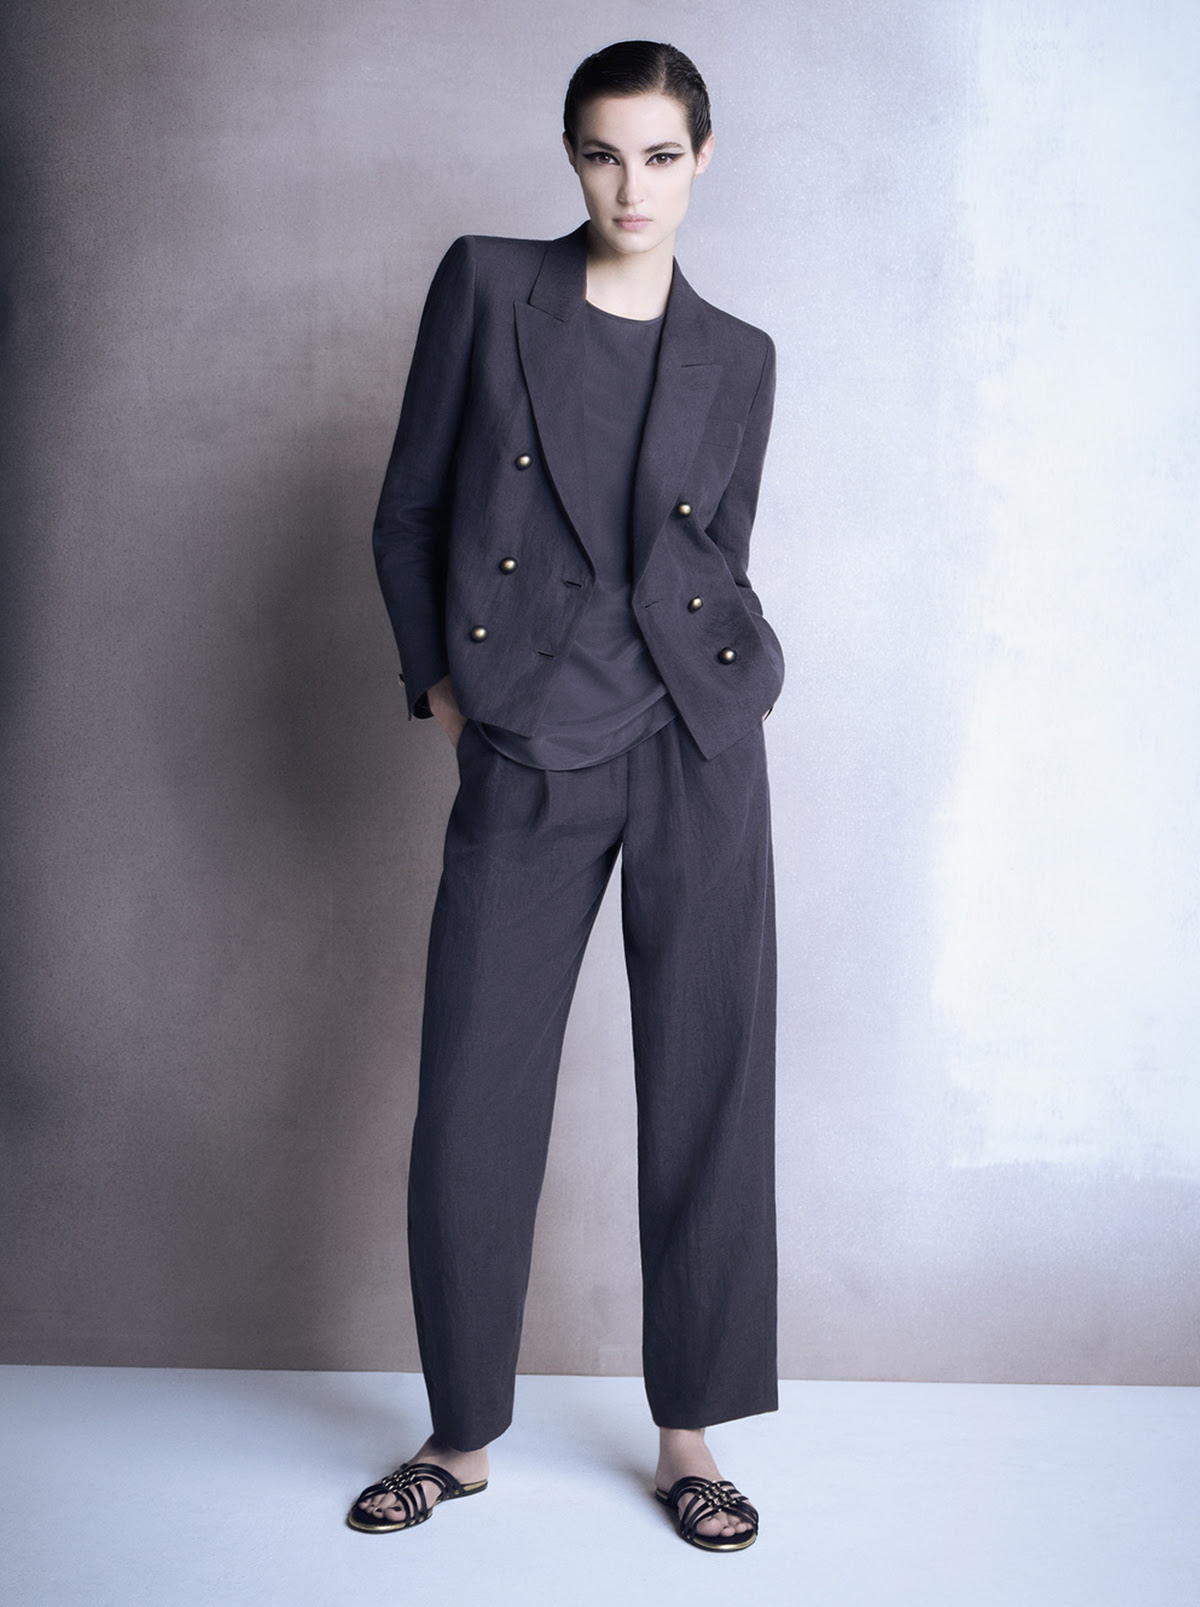 GIORGIO ARMANI - Must-have styles for every wardrobe - Pynck